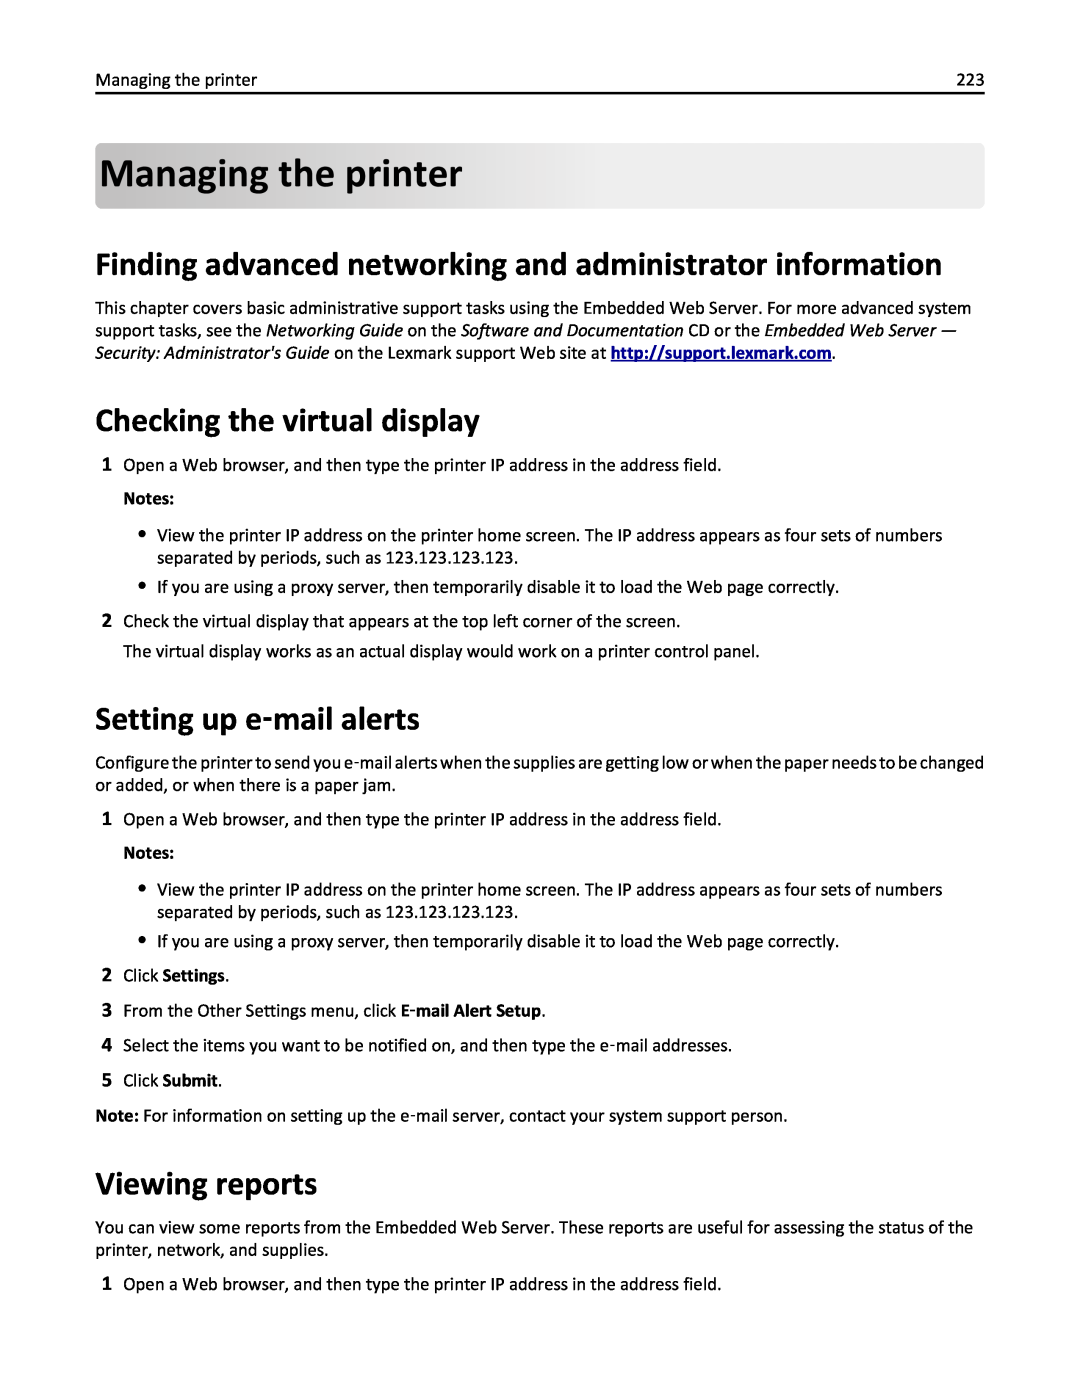 Lexmark MX410DE Managing the printer, Finding advanced networking and administrator information, Setting up e‑mail alerts 